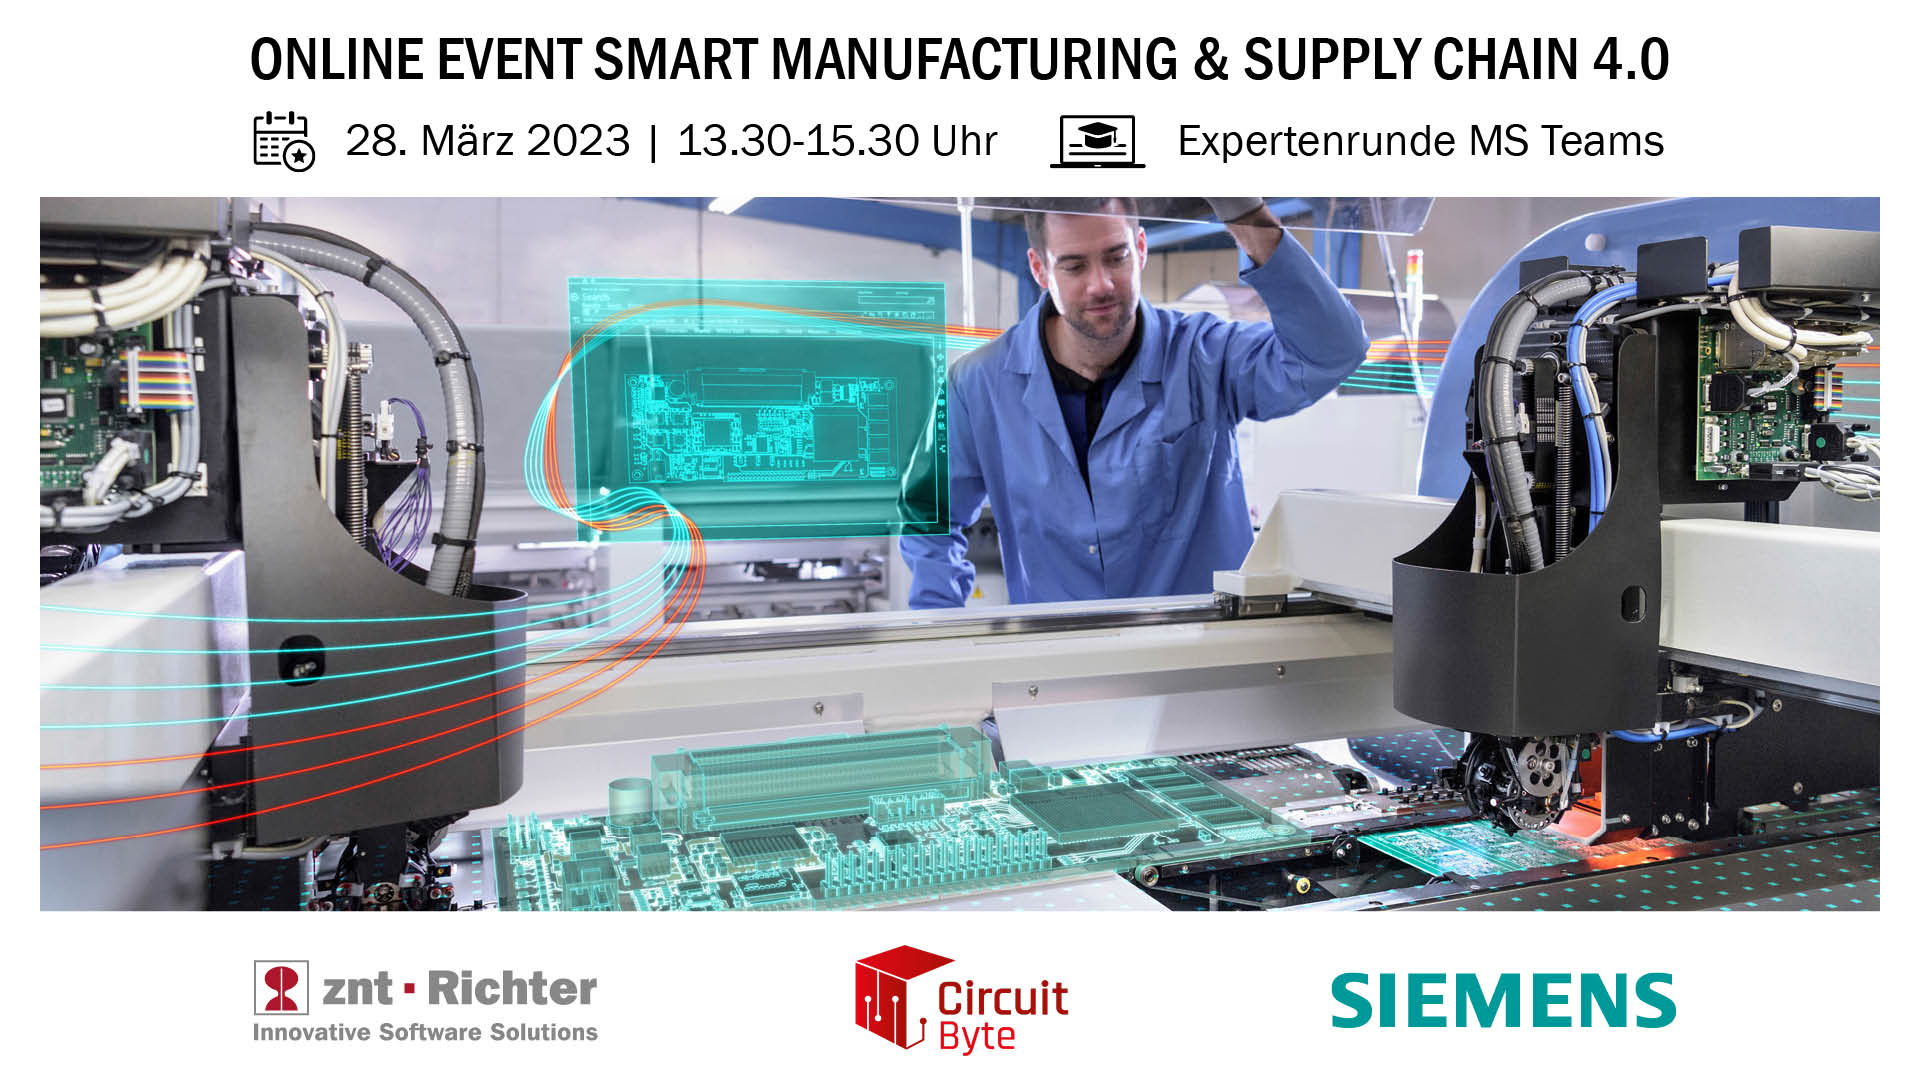 Smart Manufacturing & Supply Chain 4.0